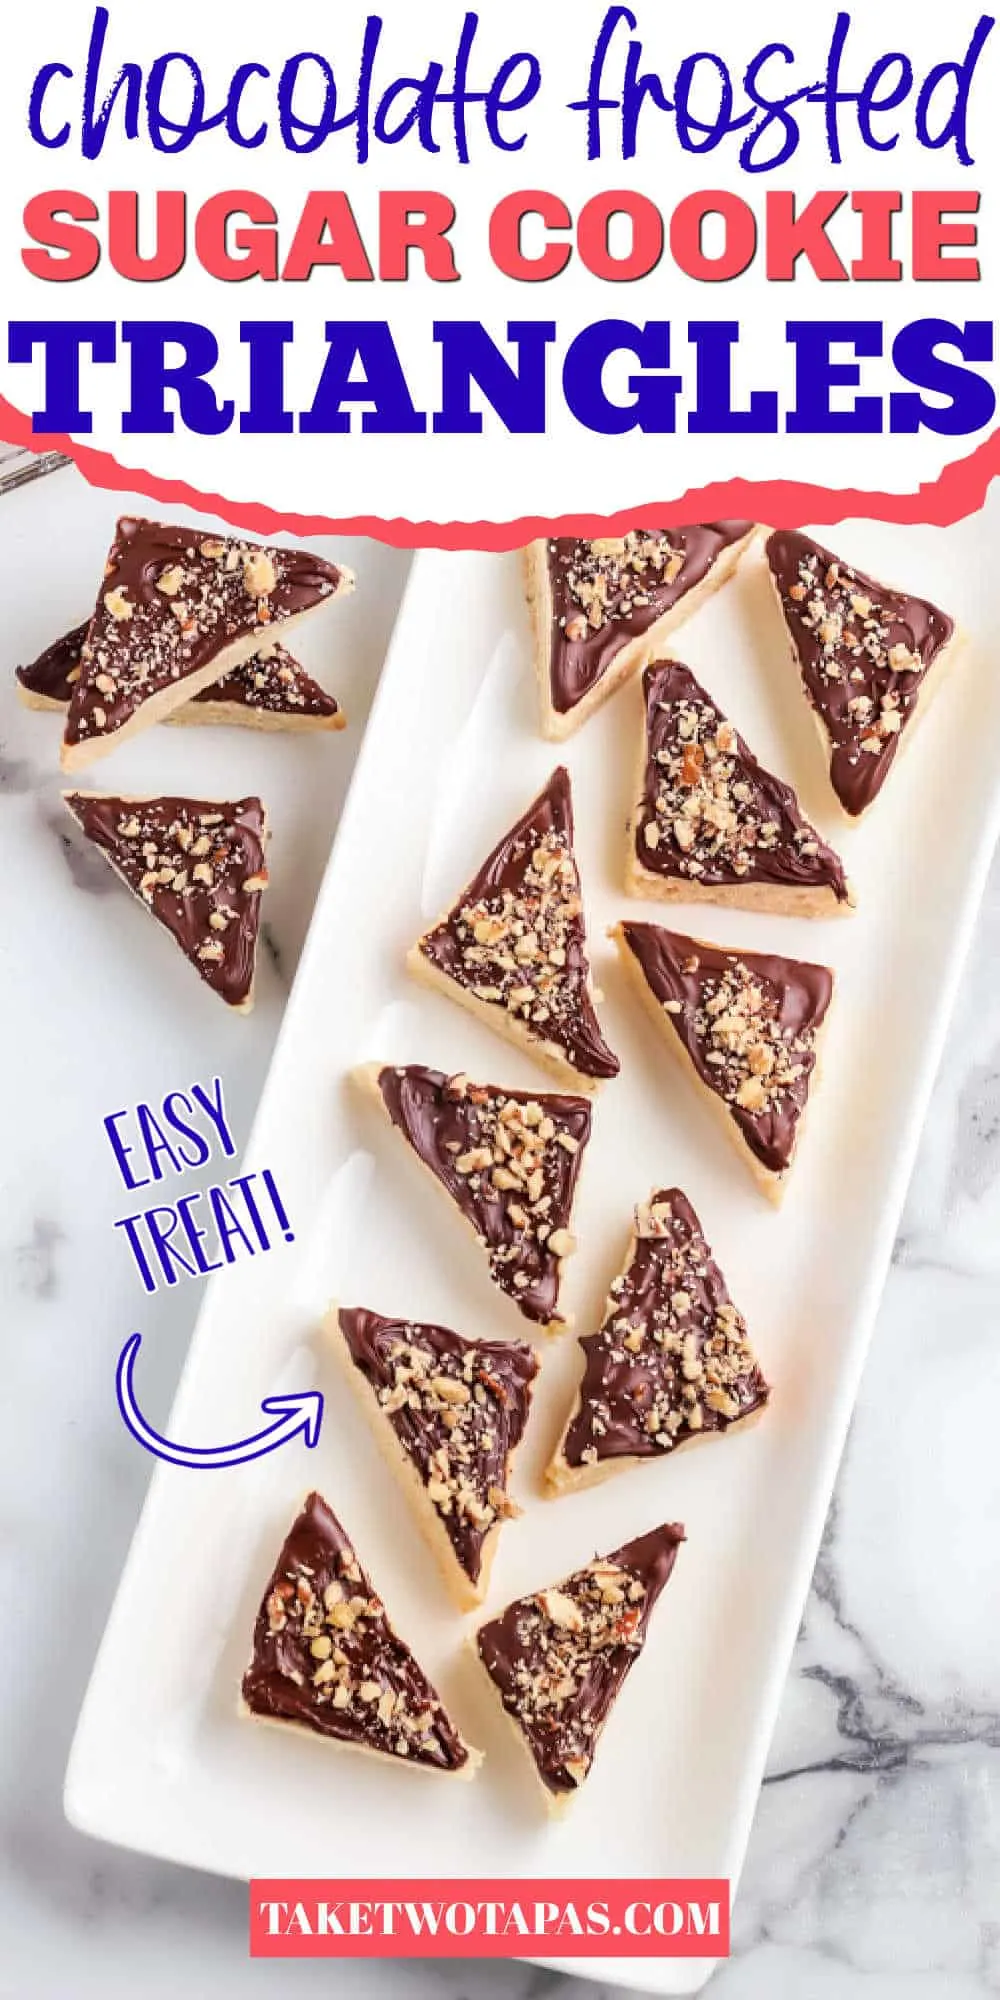 cookie triangles with text "chocolate frosted sugar cookie triangles"